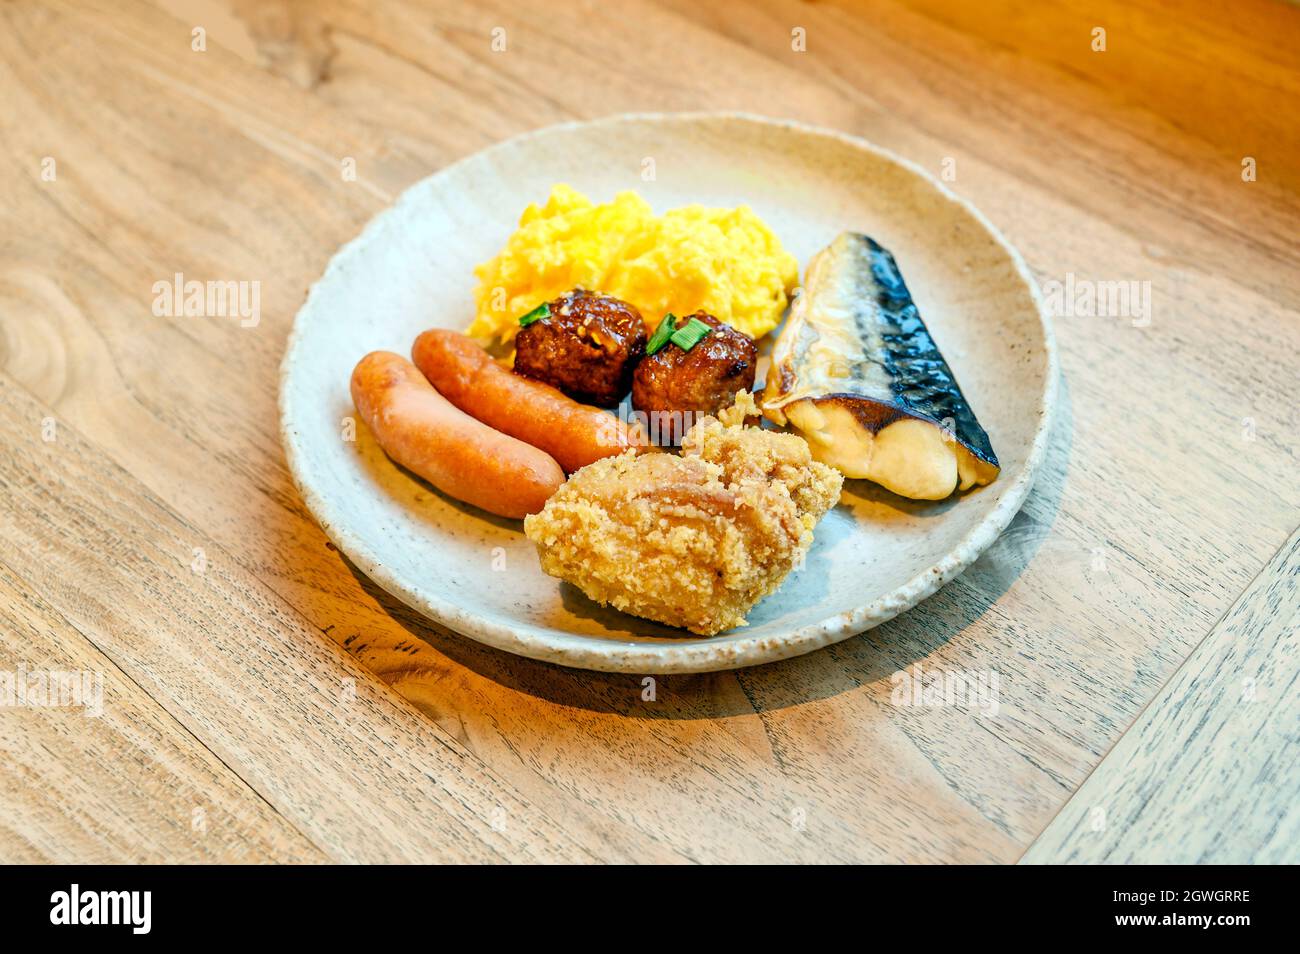 High Angle View Of Food In Plate On Table Stock Photo